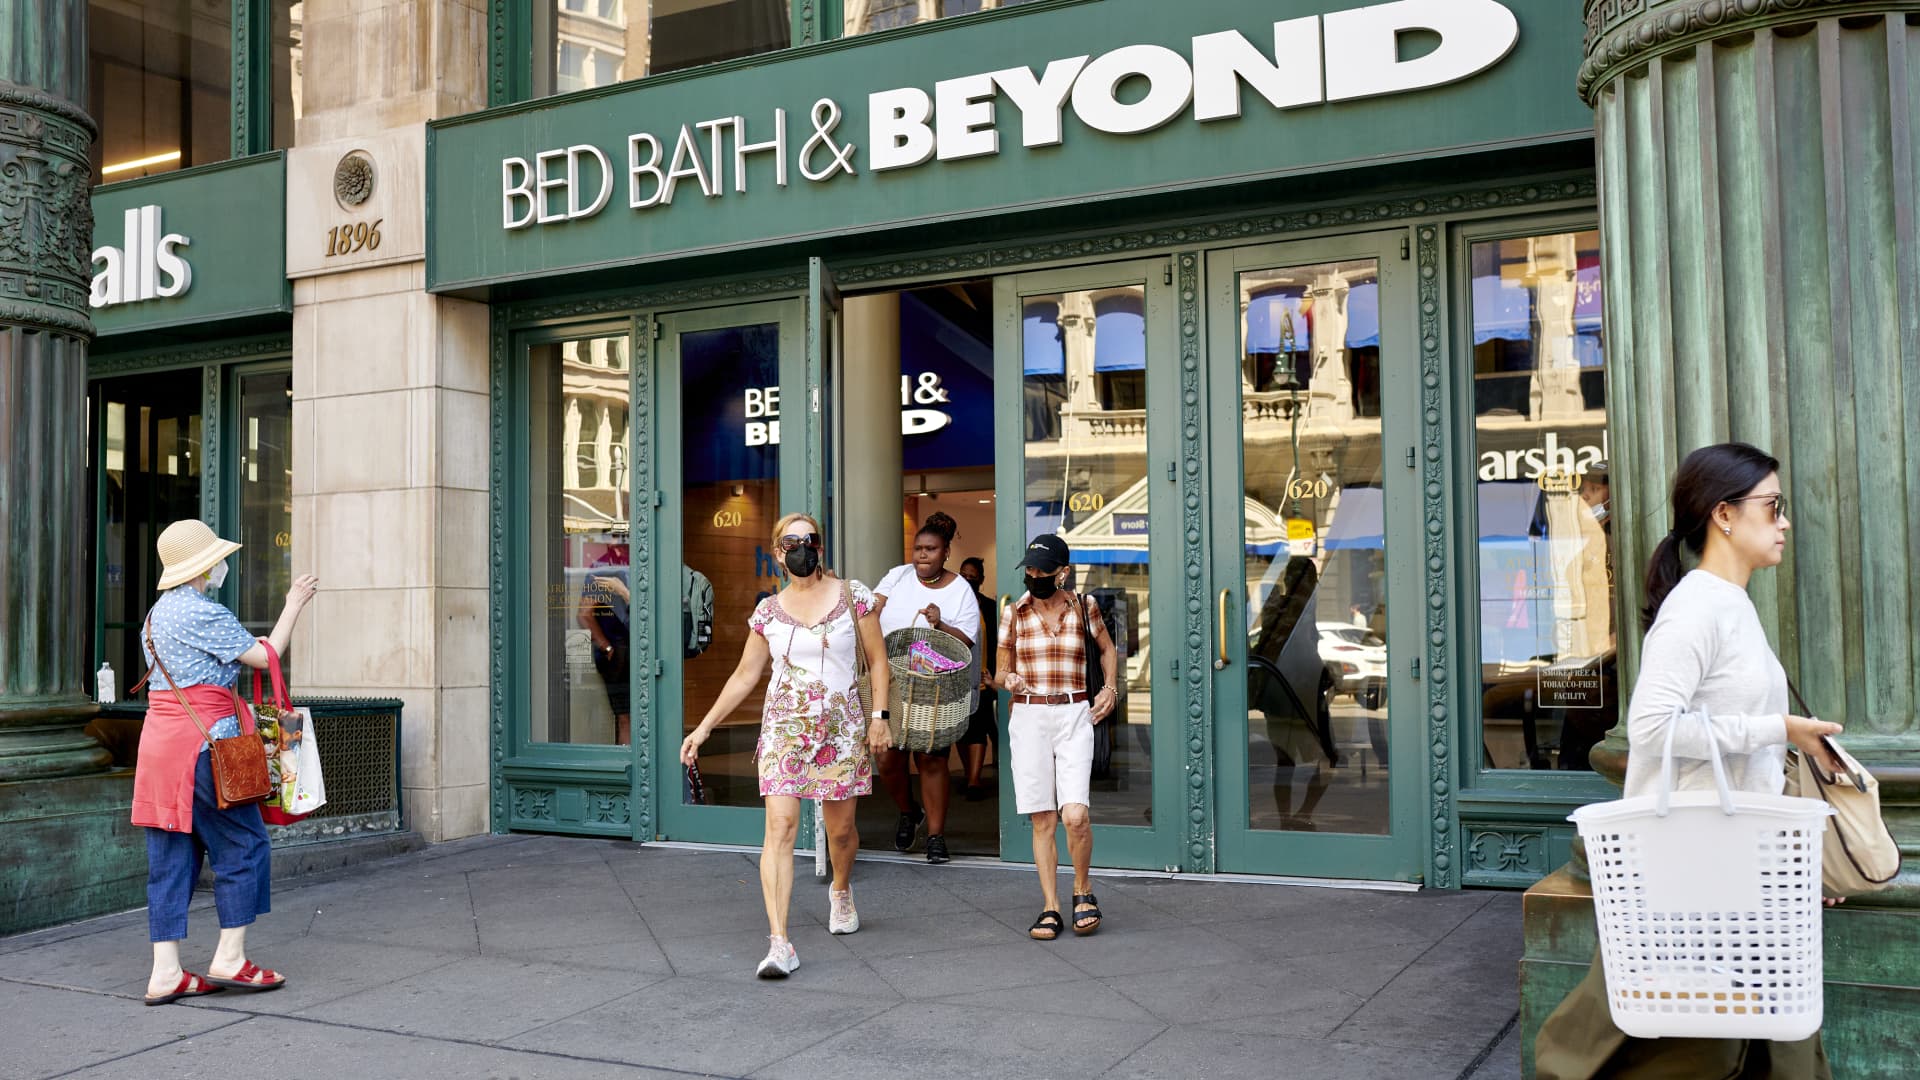 Bed Bath & Beyond shares crater after meme stock files share offering of undisclosed amount